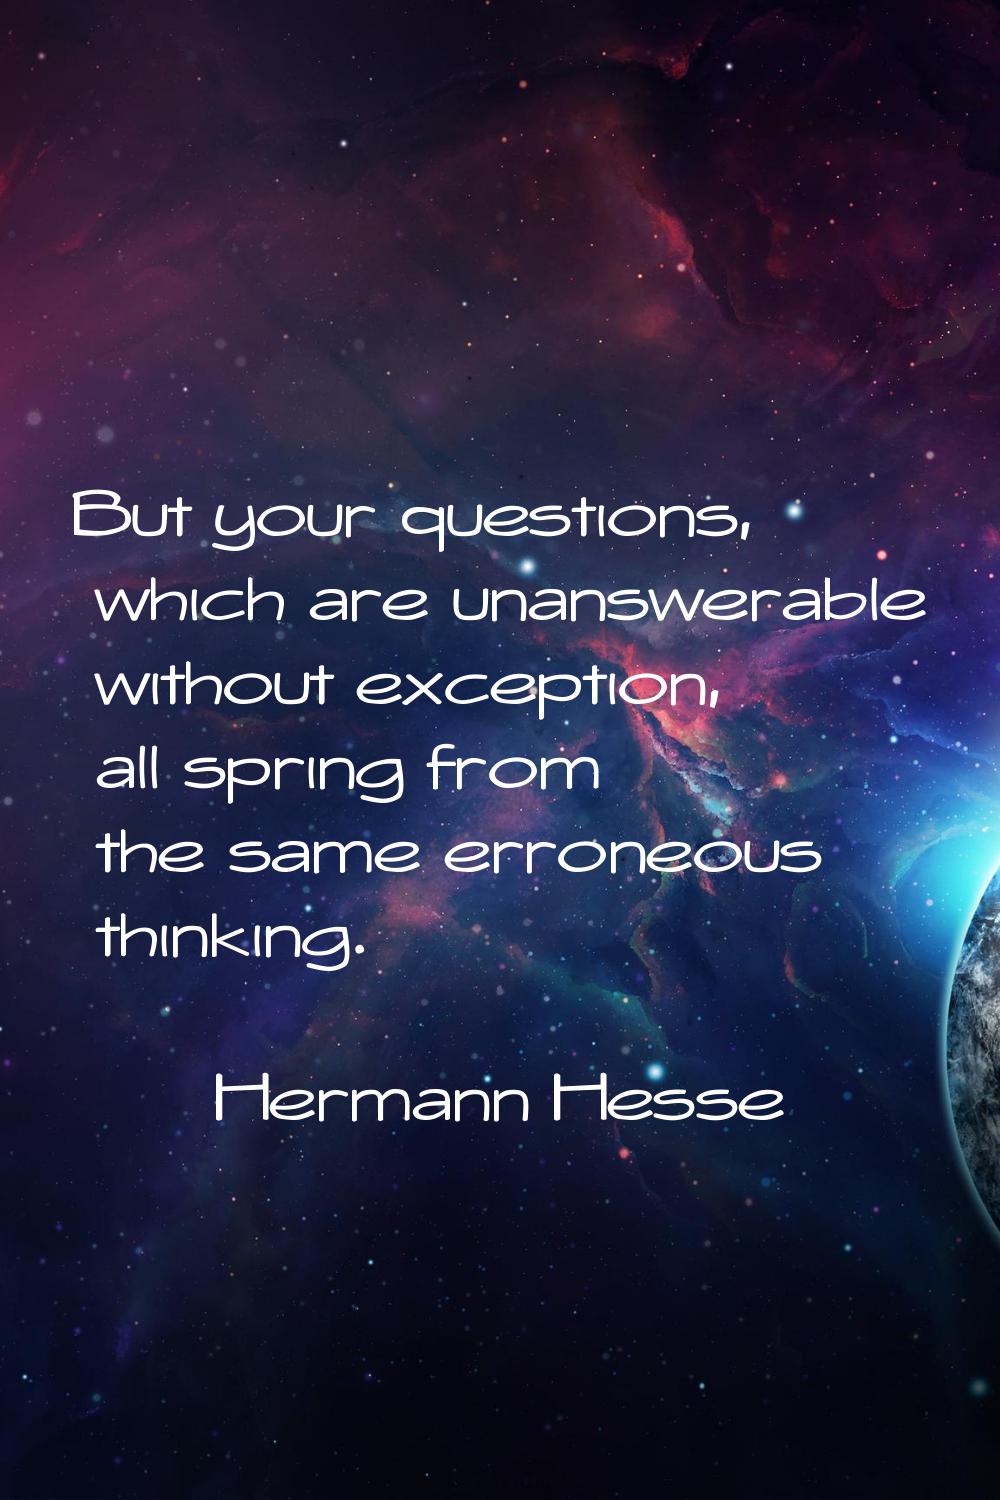 But your questions, which are unanswerable without exception, all spring from the same erroneous th